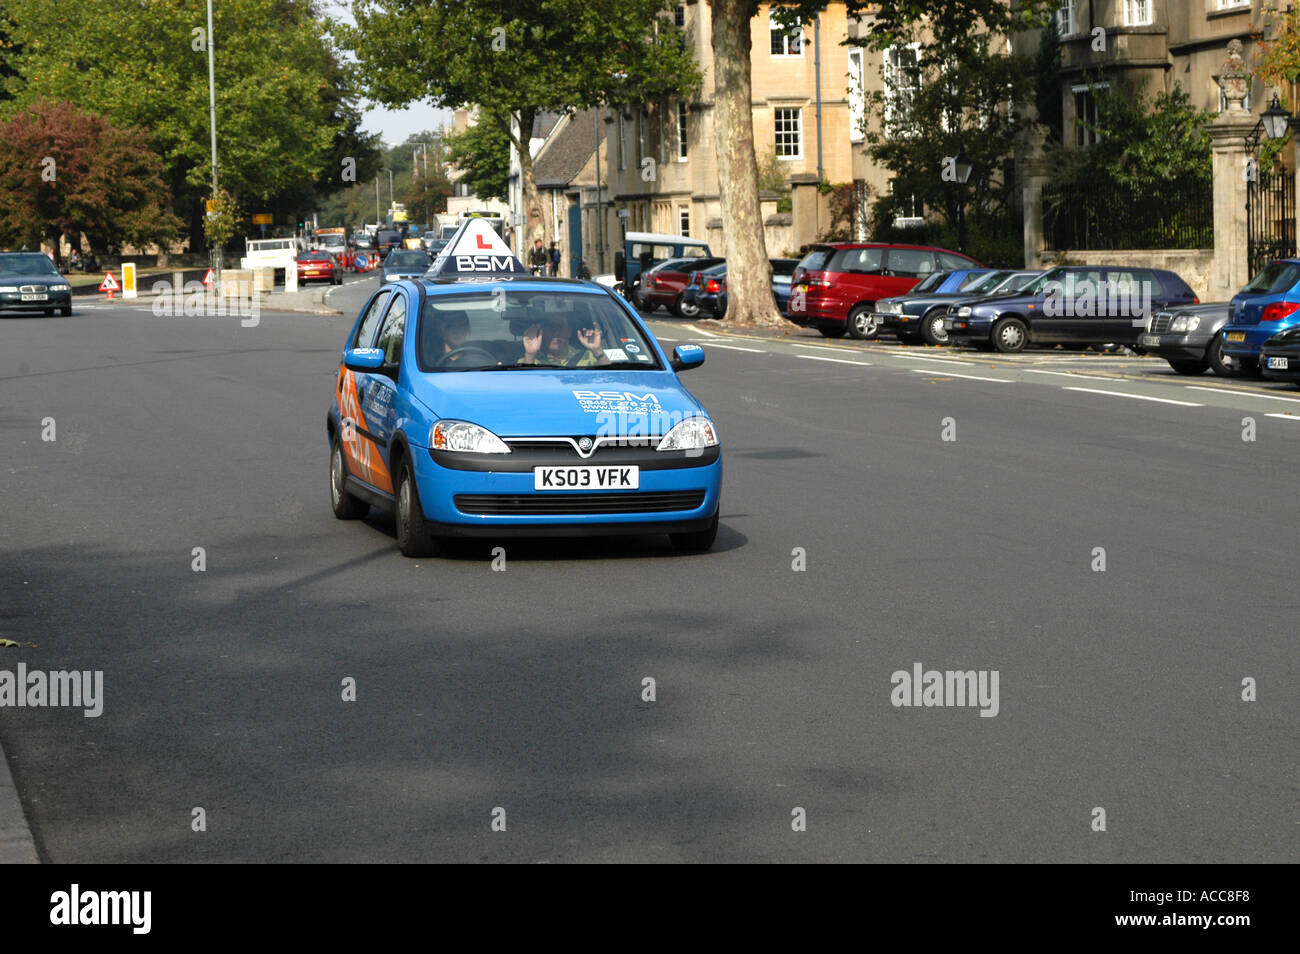 Driving school car in St Giles street Oxford England  Stock Photo